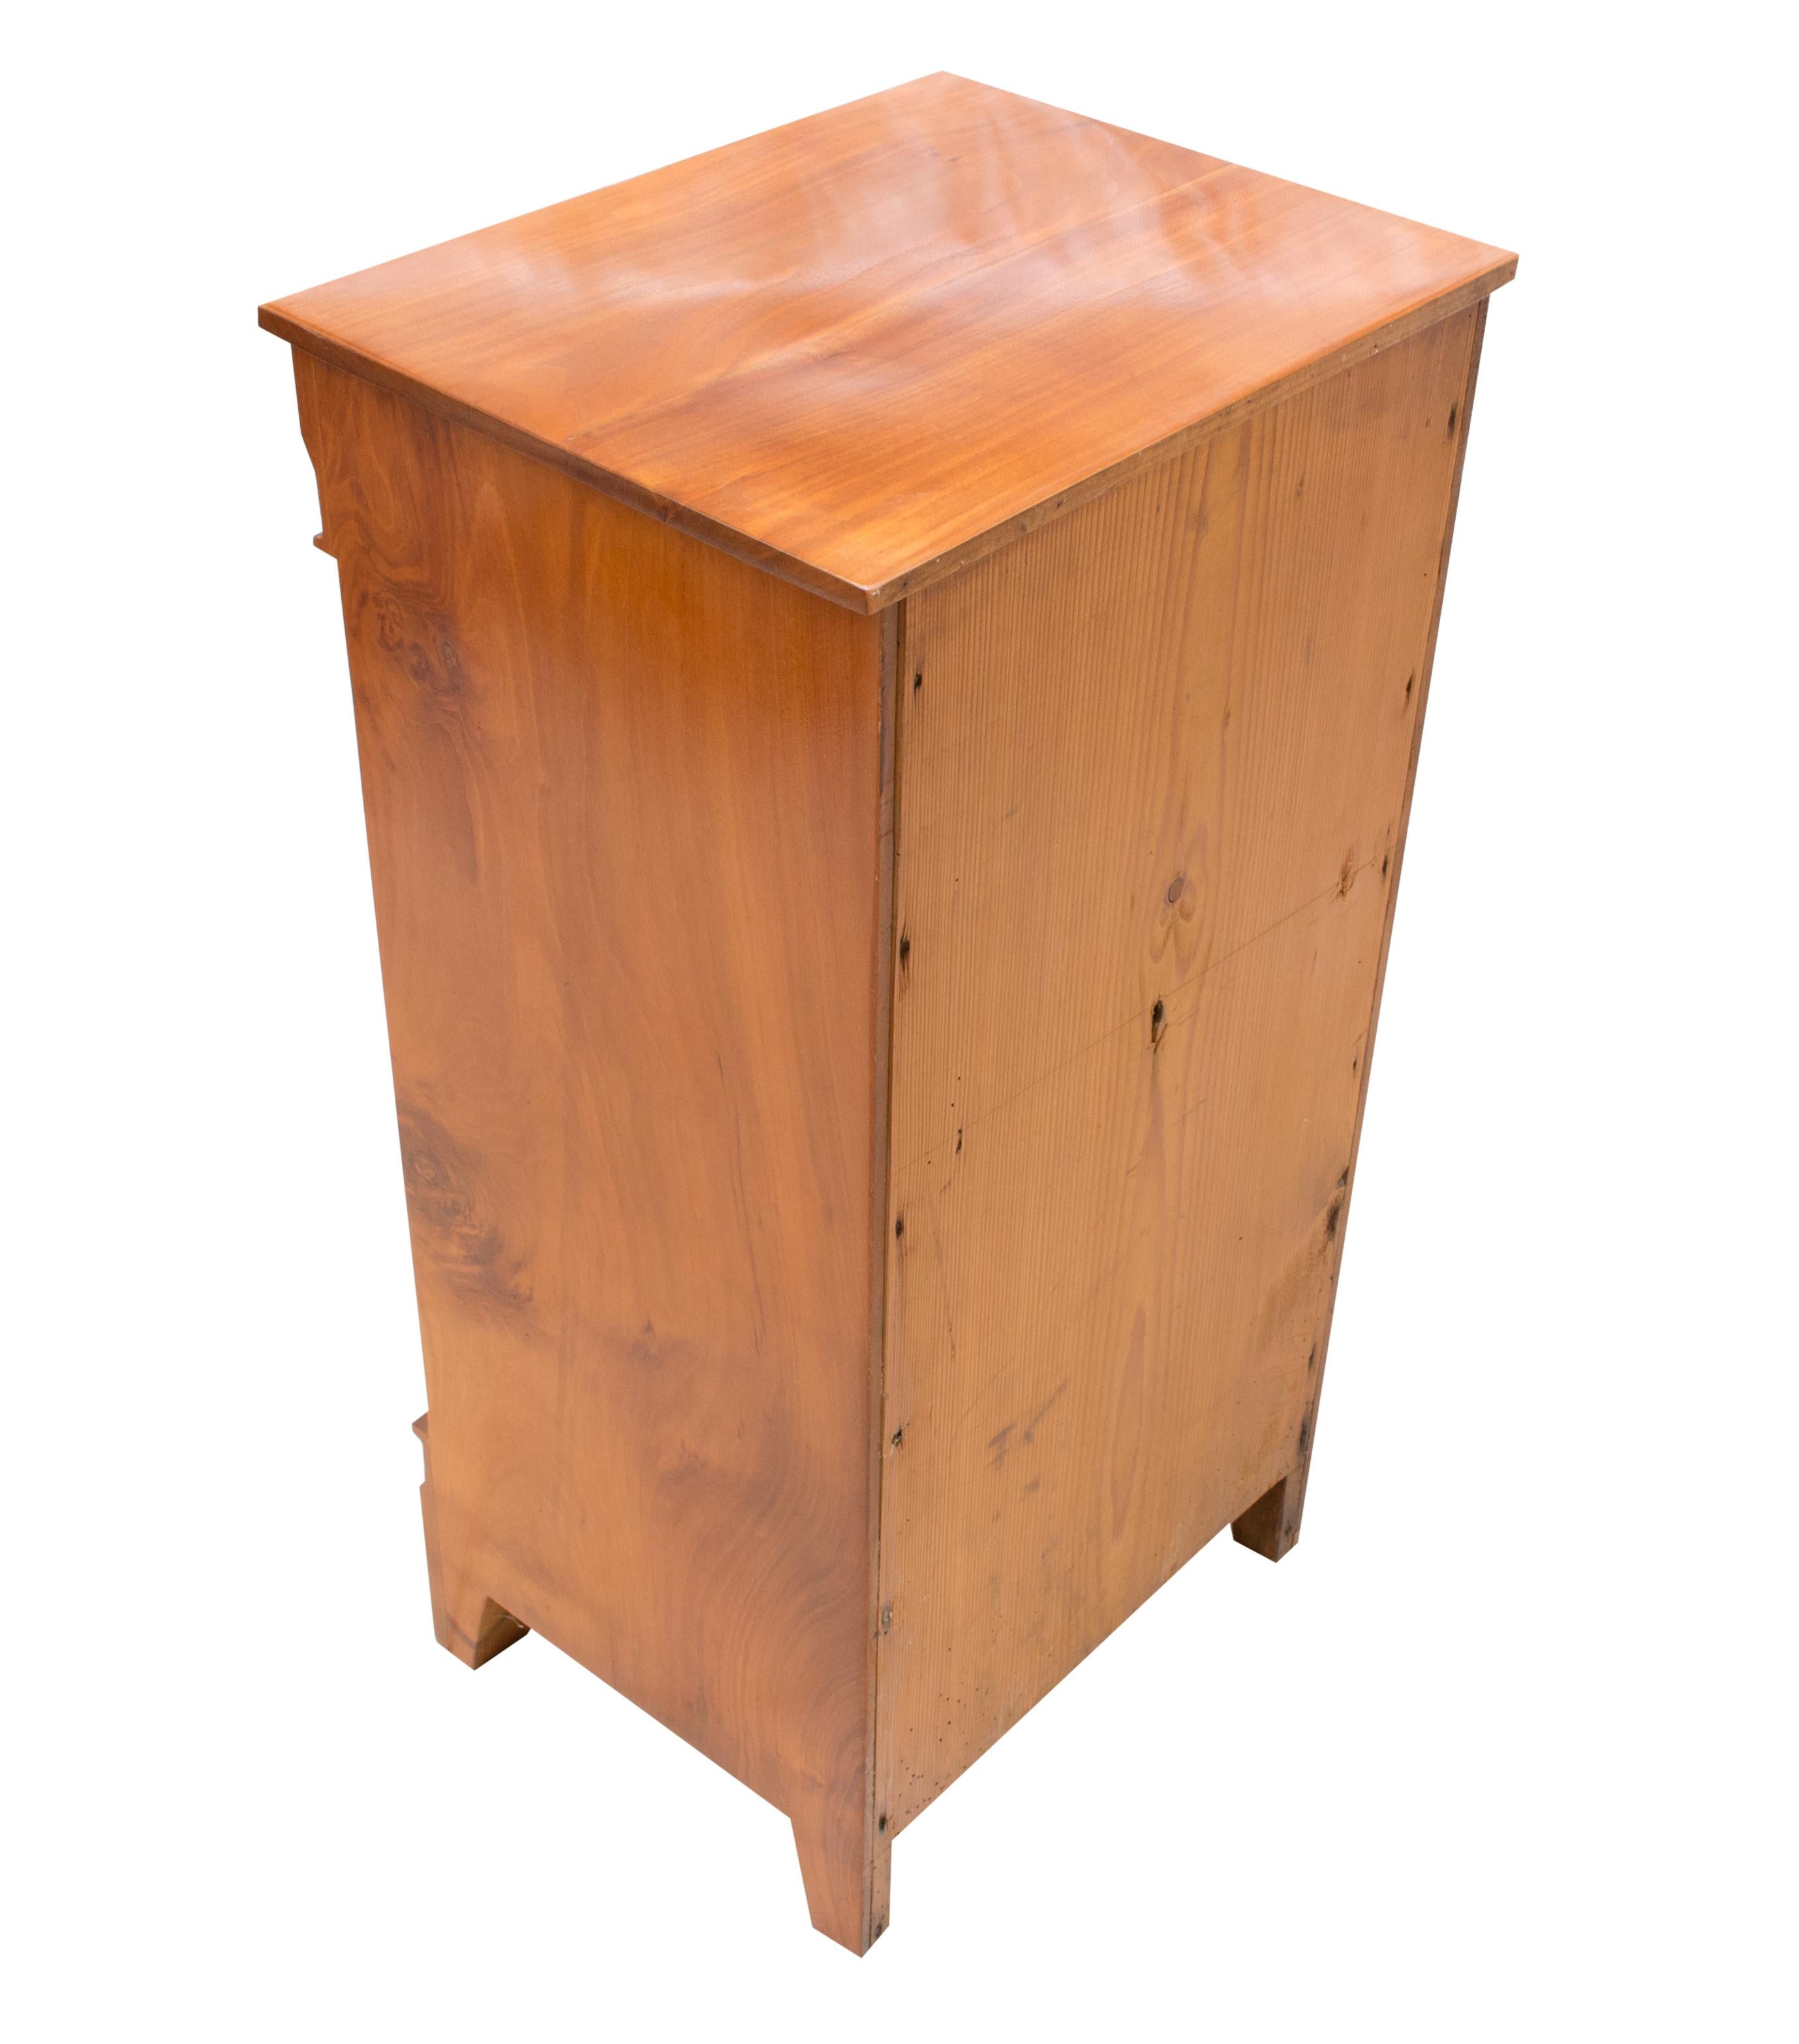 German Early 19th Century Small Cherry Nightstand or Pillar Cabinet